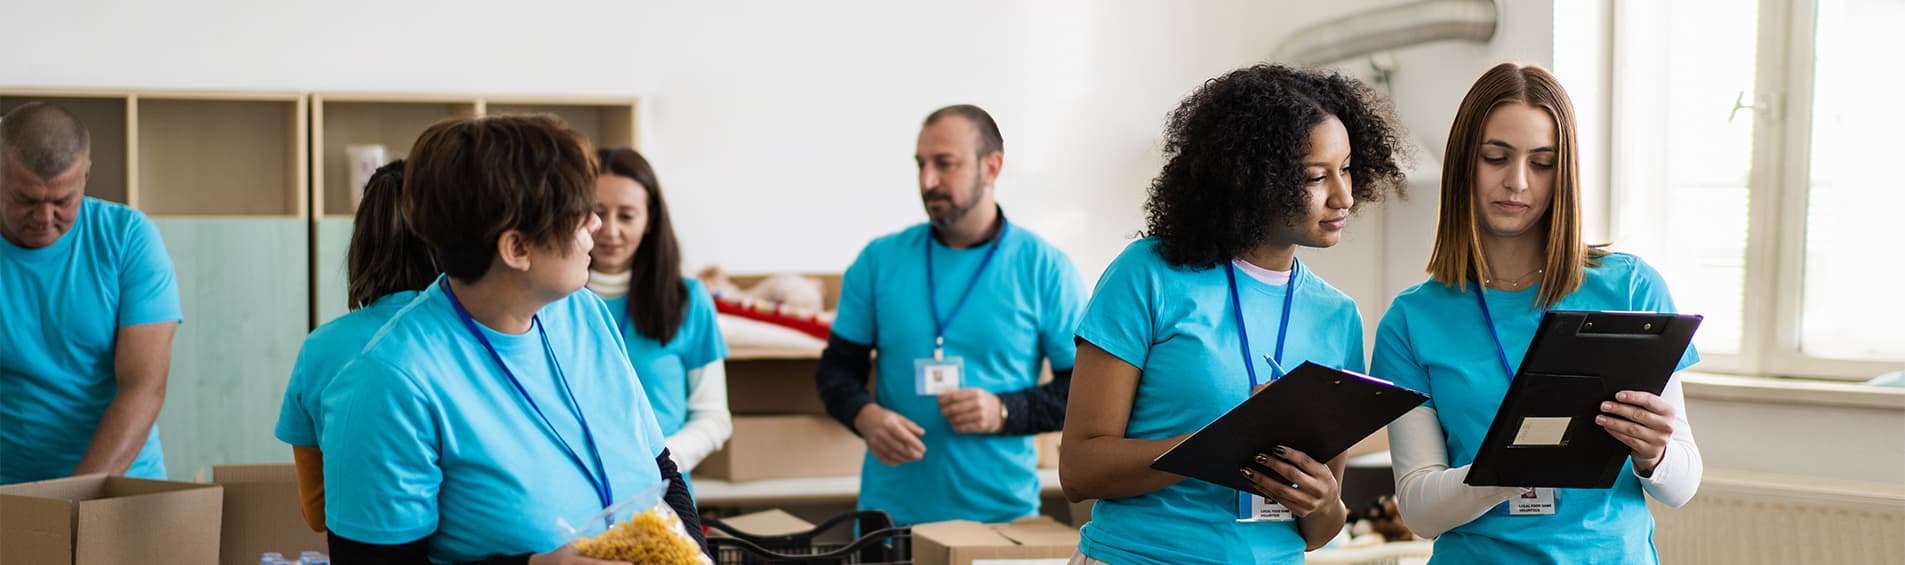 A group of volunteers. In the foreground, a diverse group of women check notes on a clipboard. In the background, others work on assembling boxes.